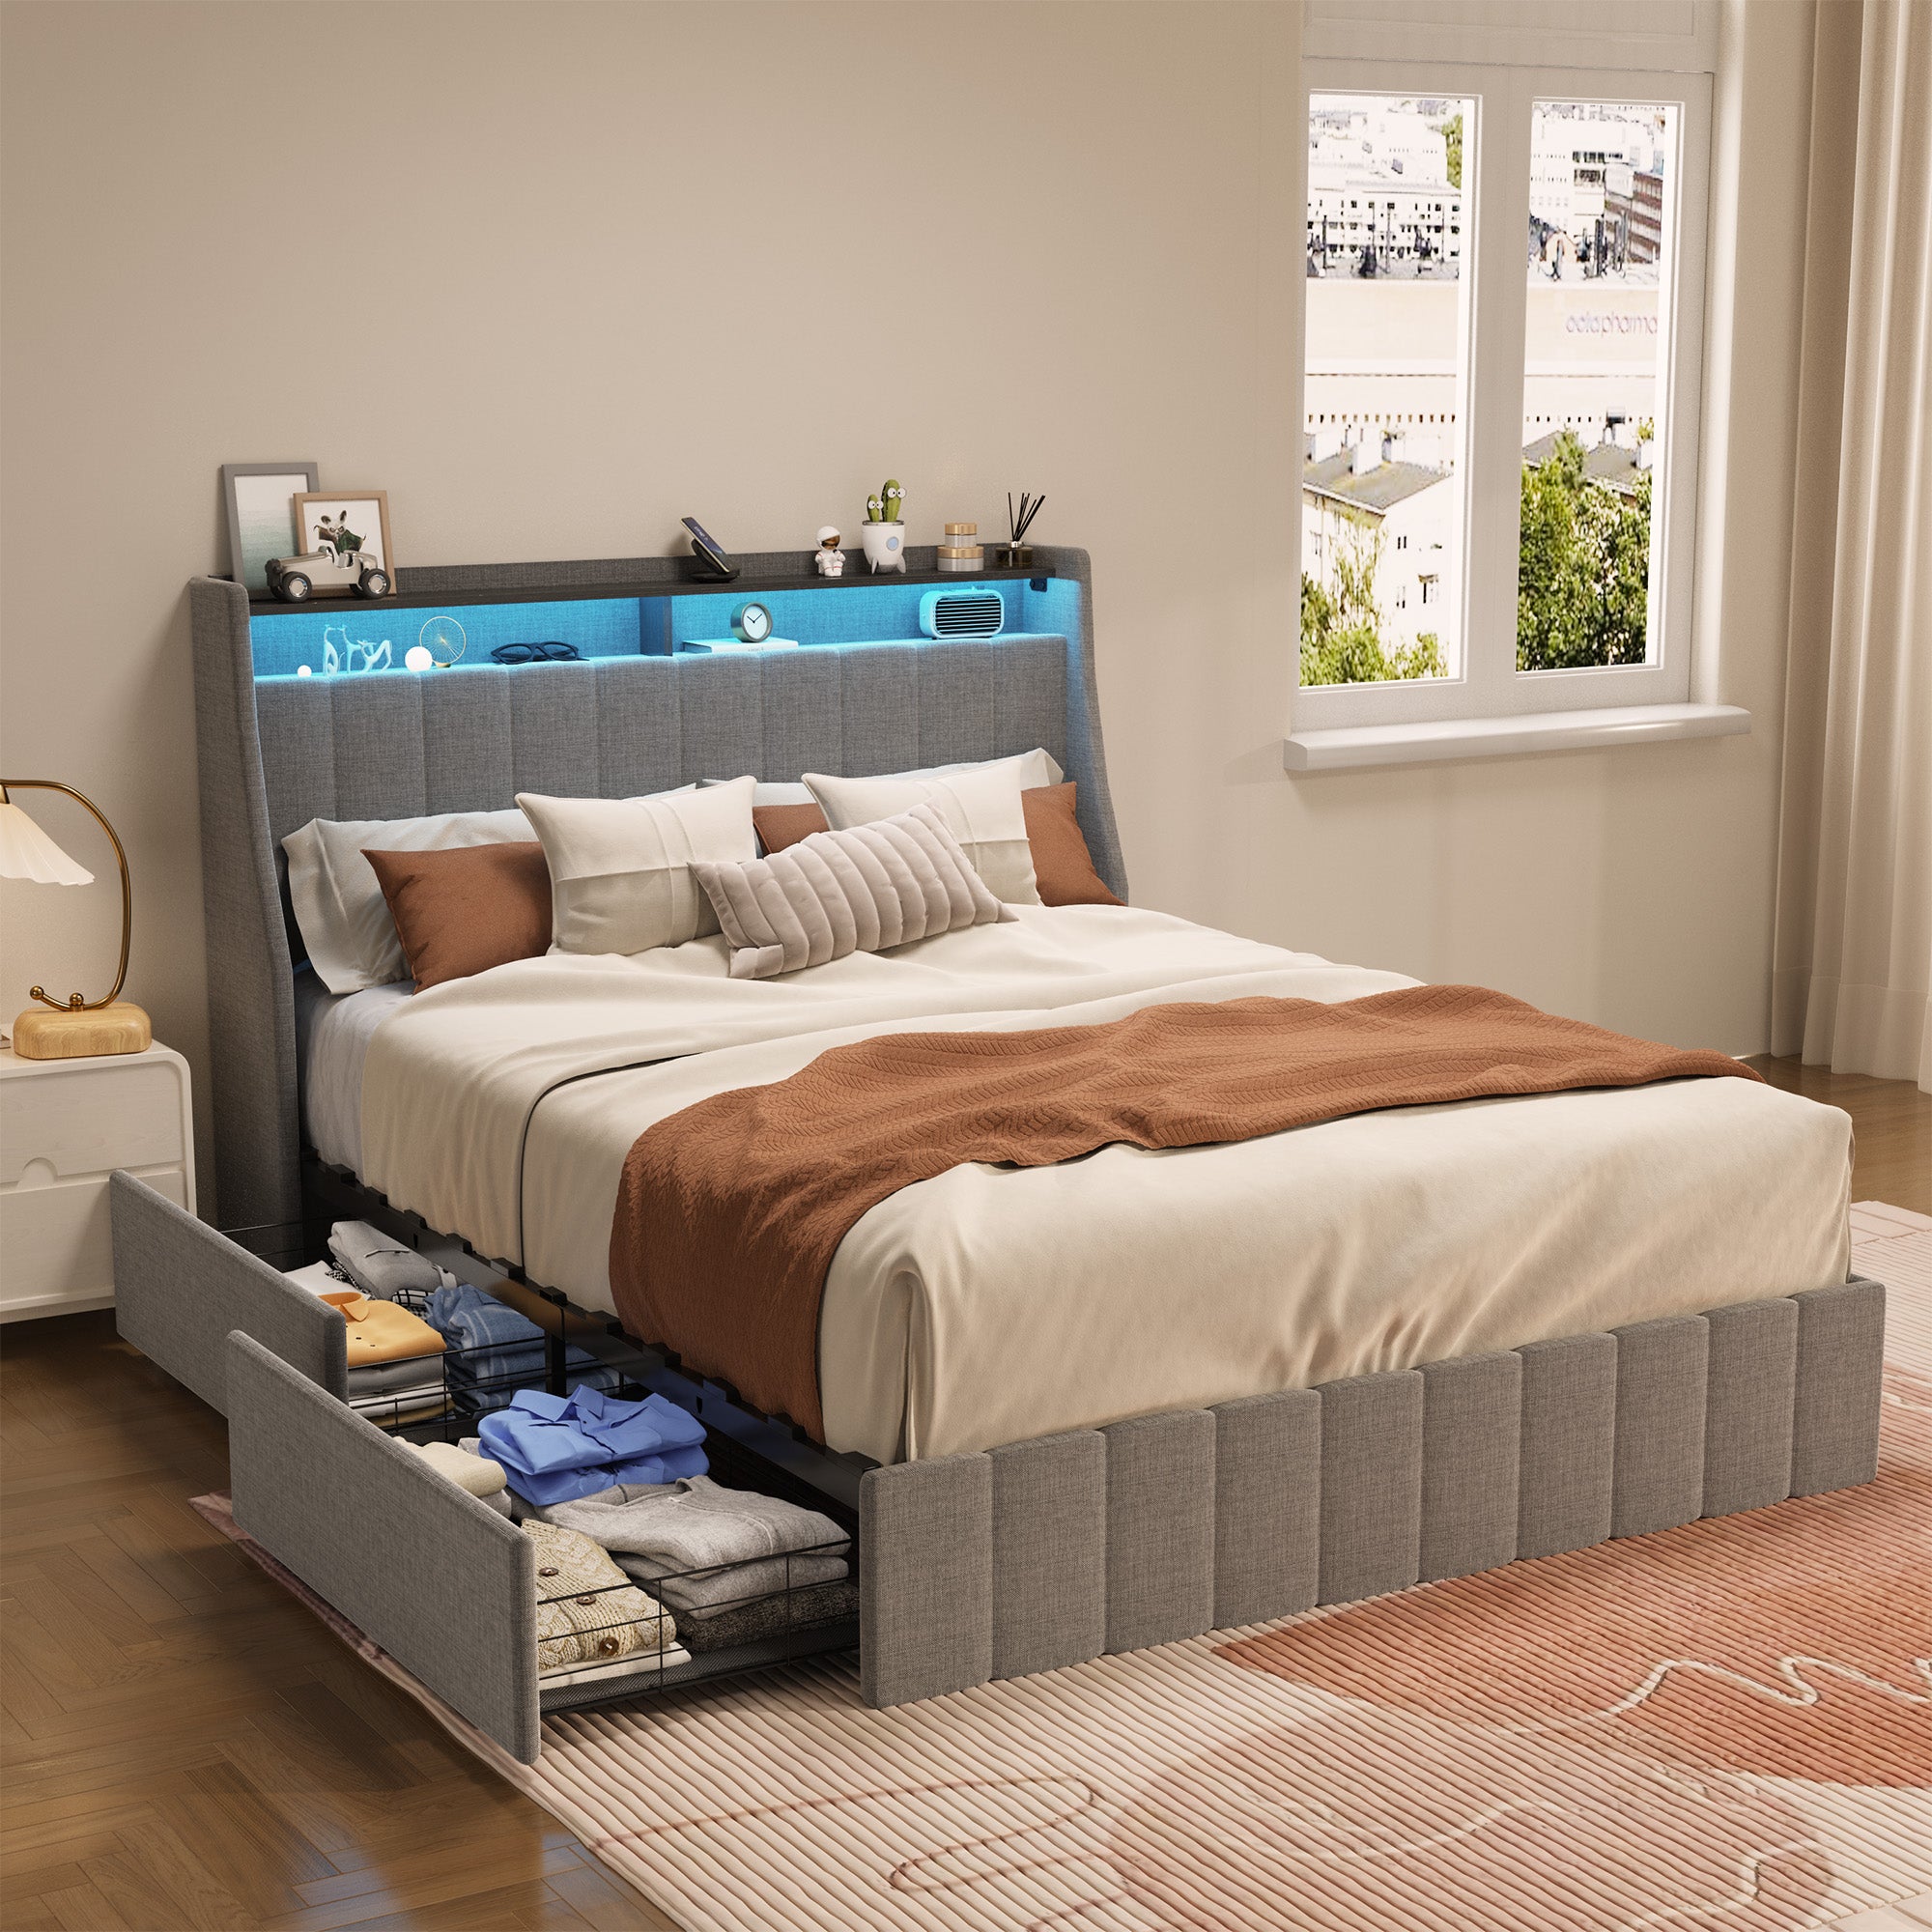 Bellemave Metal Platform Bed with LED,4 Under-bed Portable Storage Drawers and Wings Headboard Design